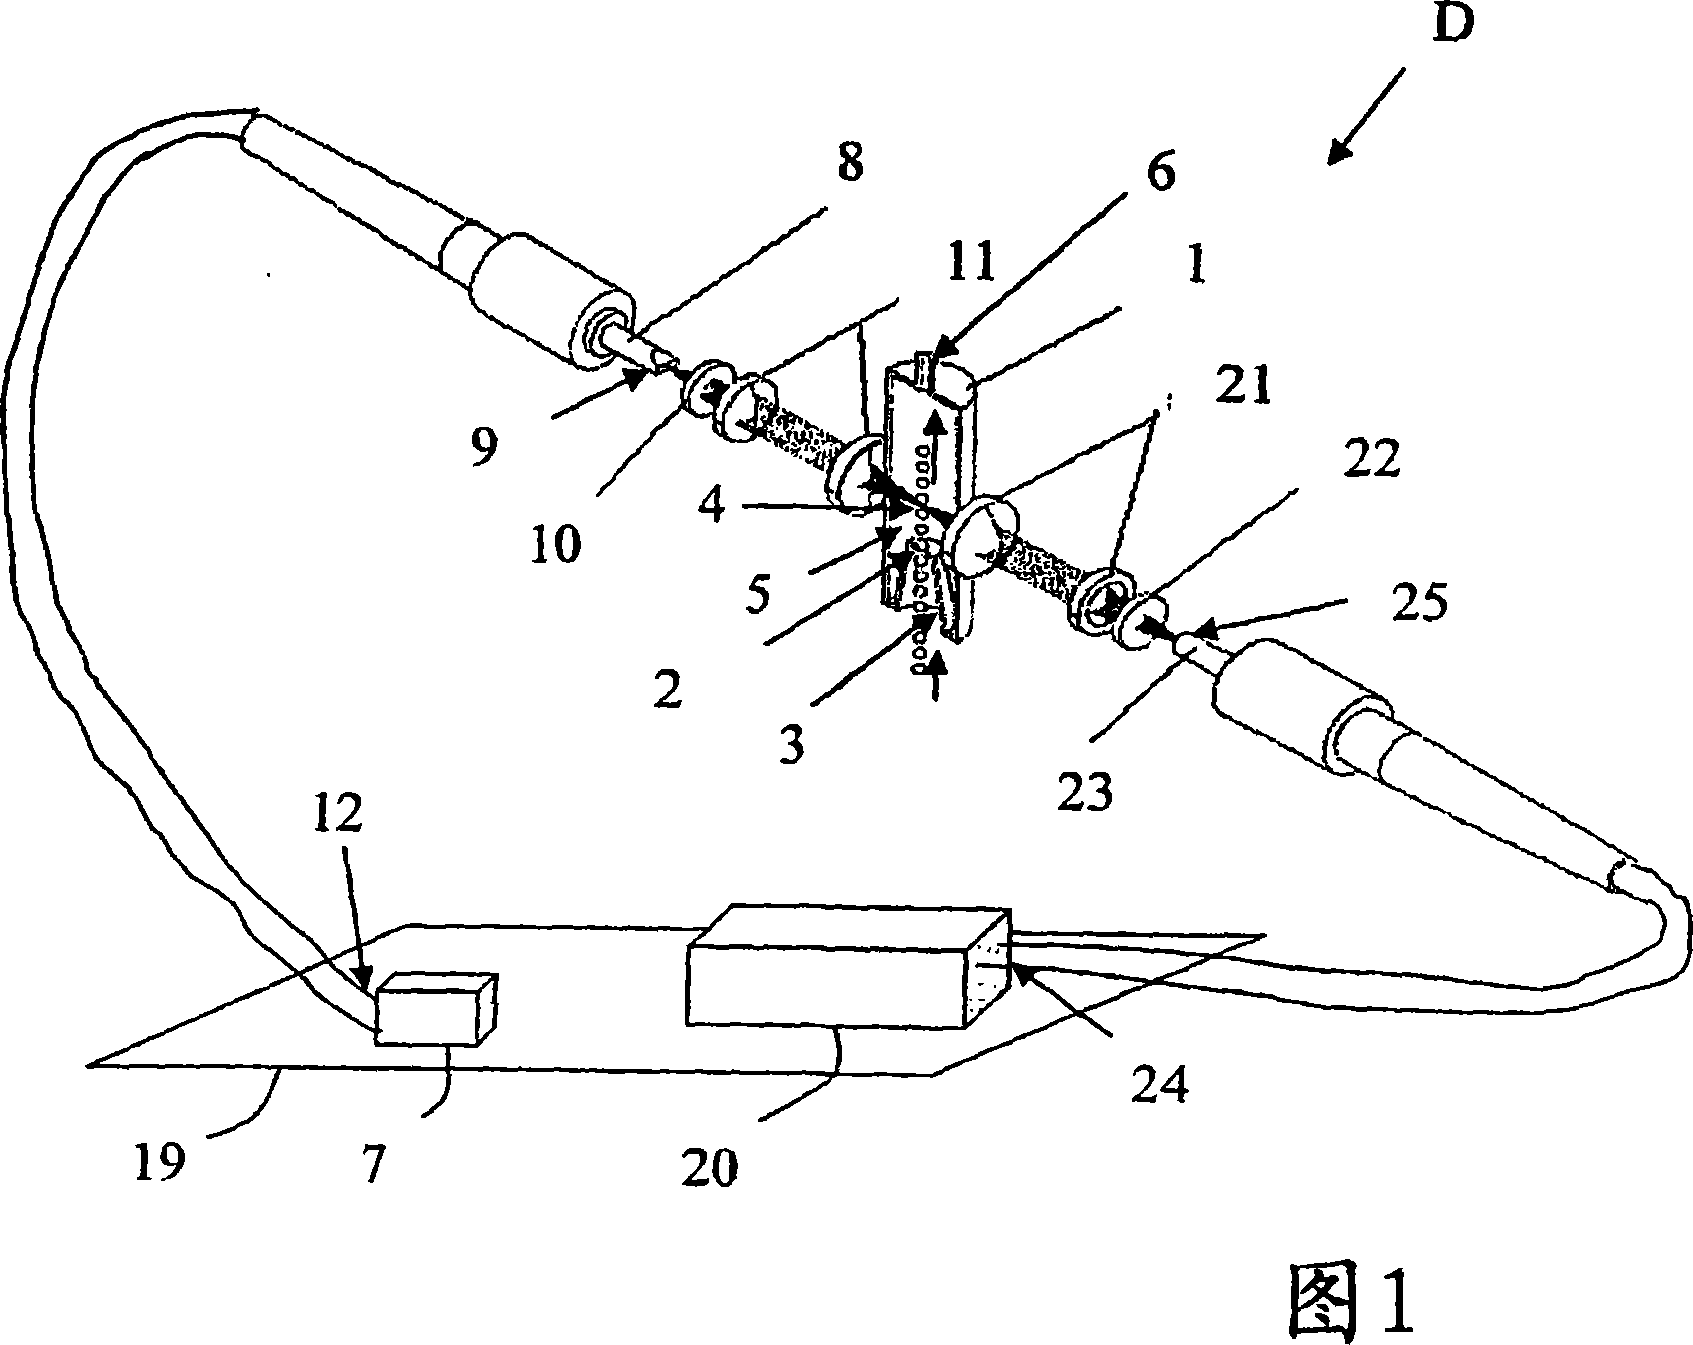 Device for examining a fluid by uniform illumination using a configured light guide